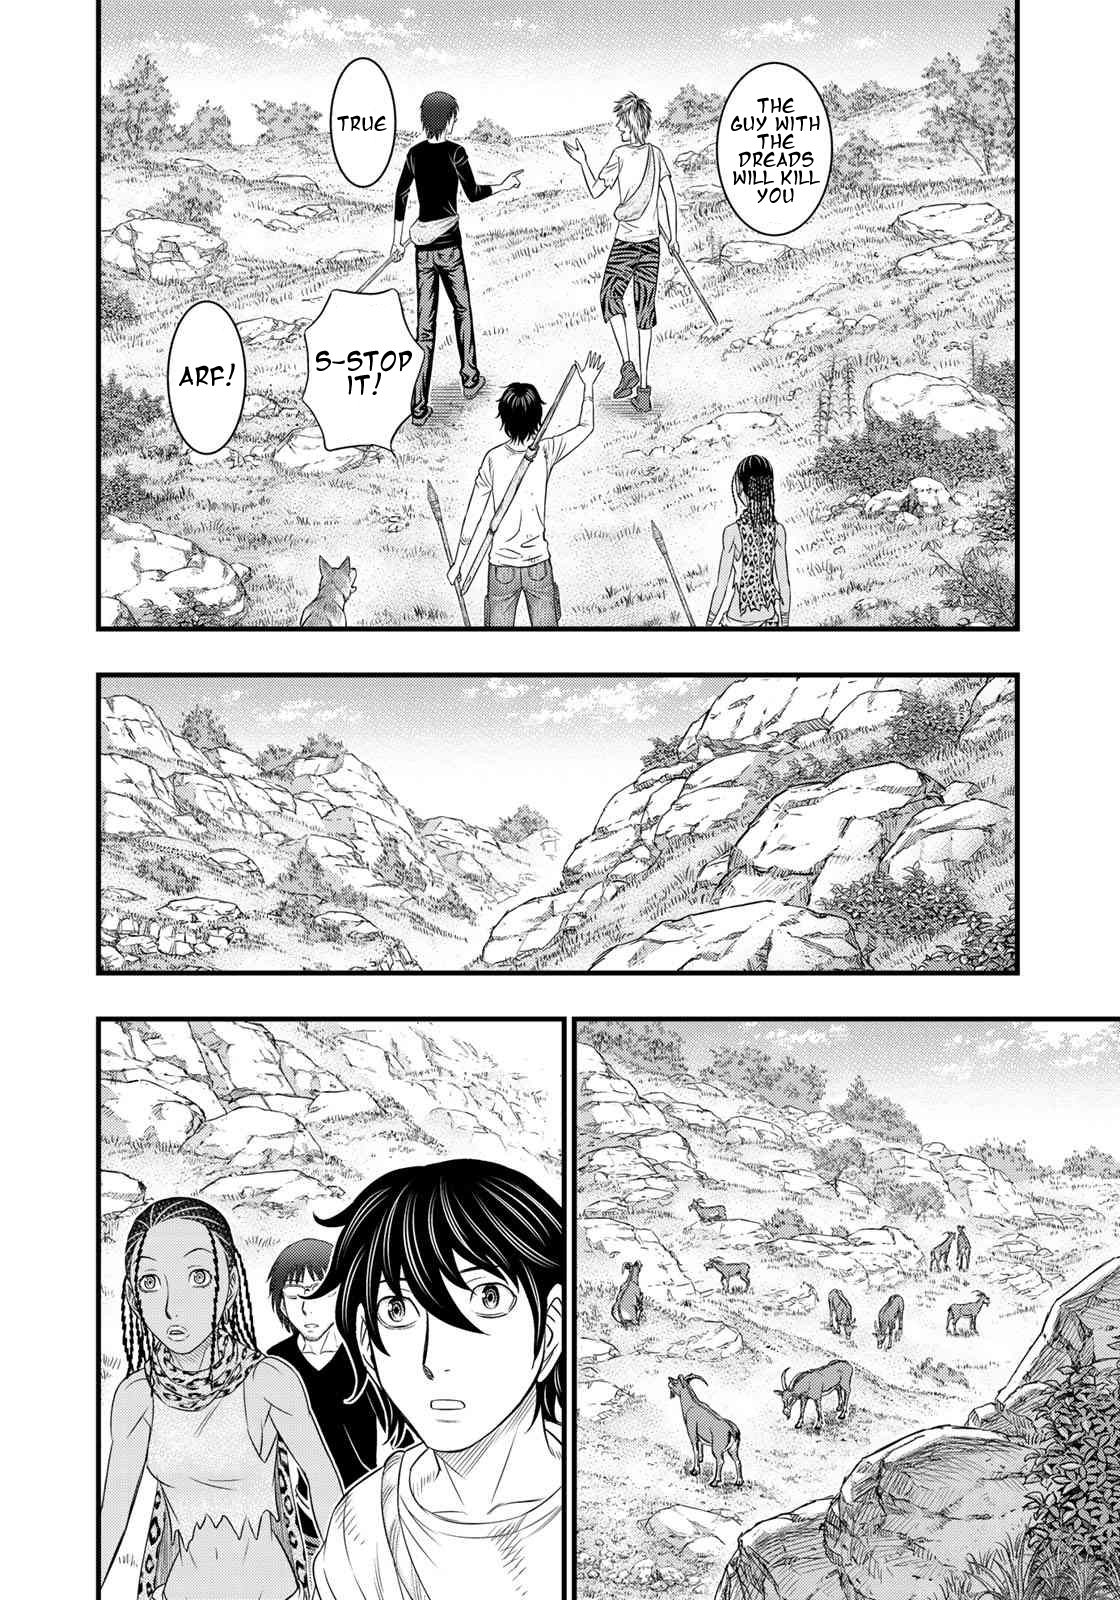 Sousei no Taiga Vol. 4 Ch. 32 The Hunting Grounds